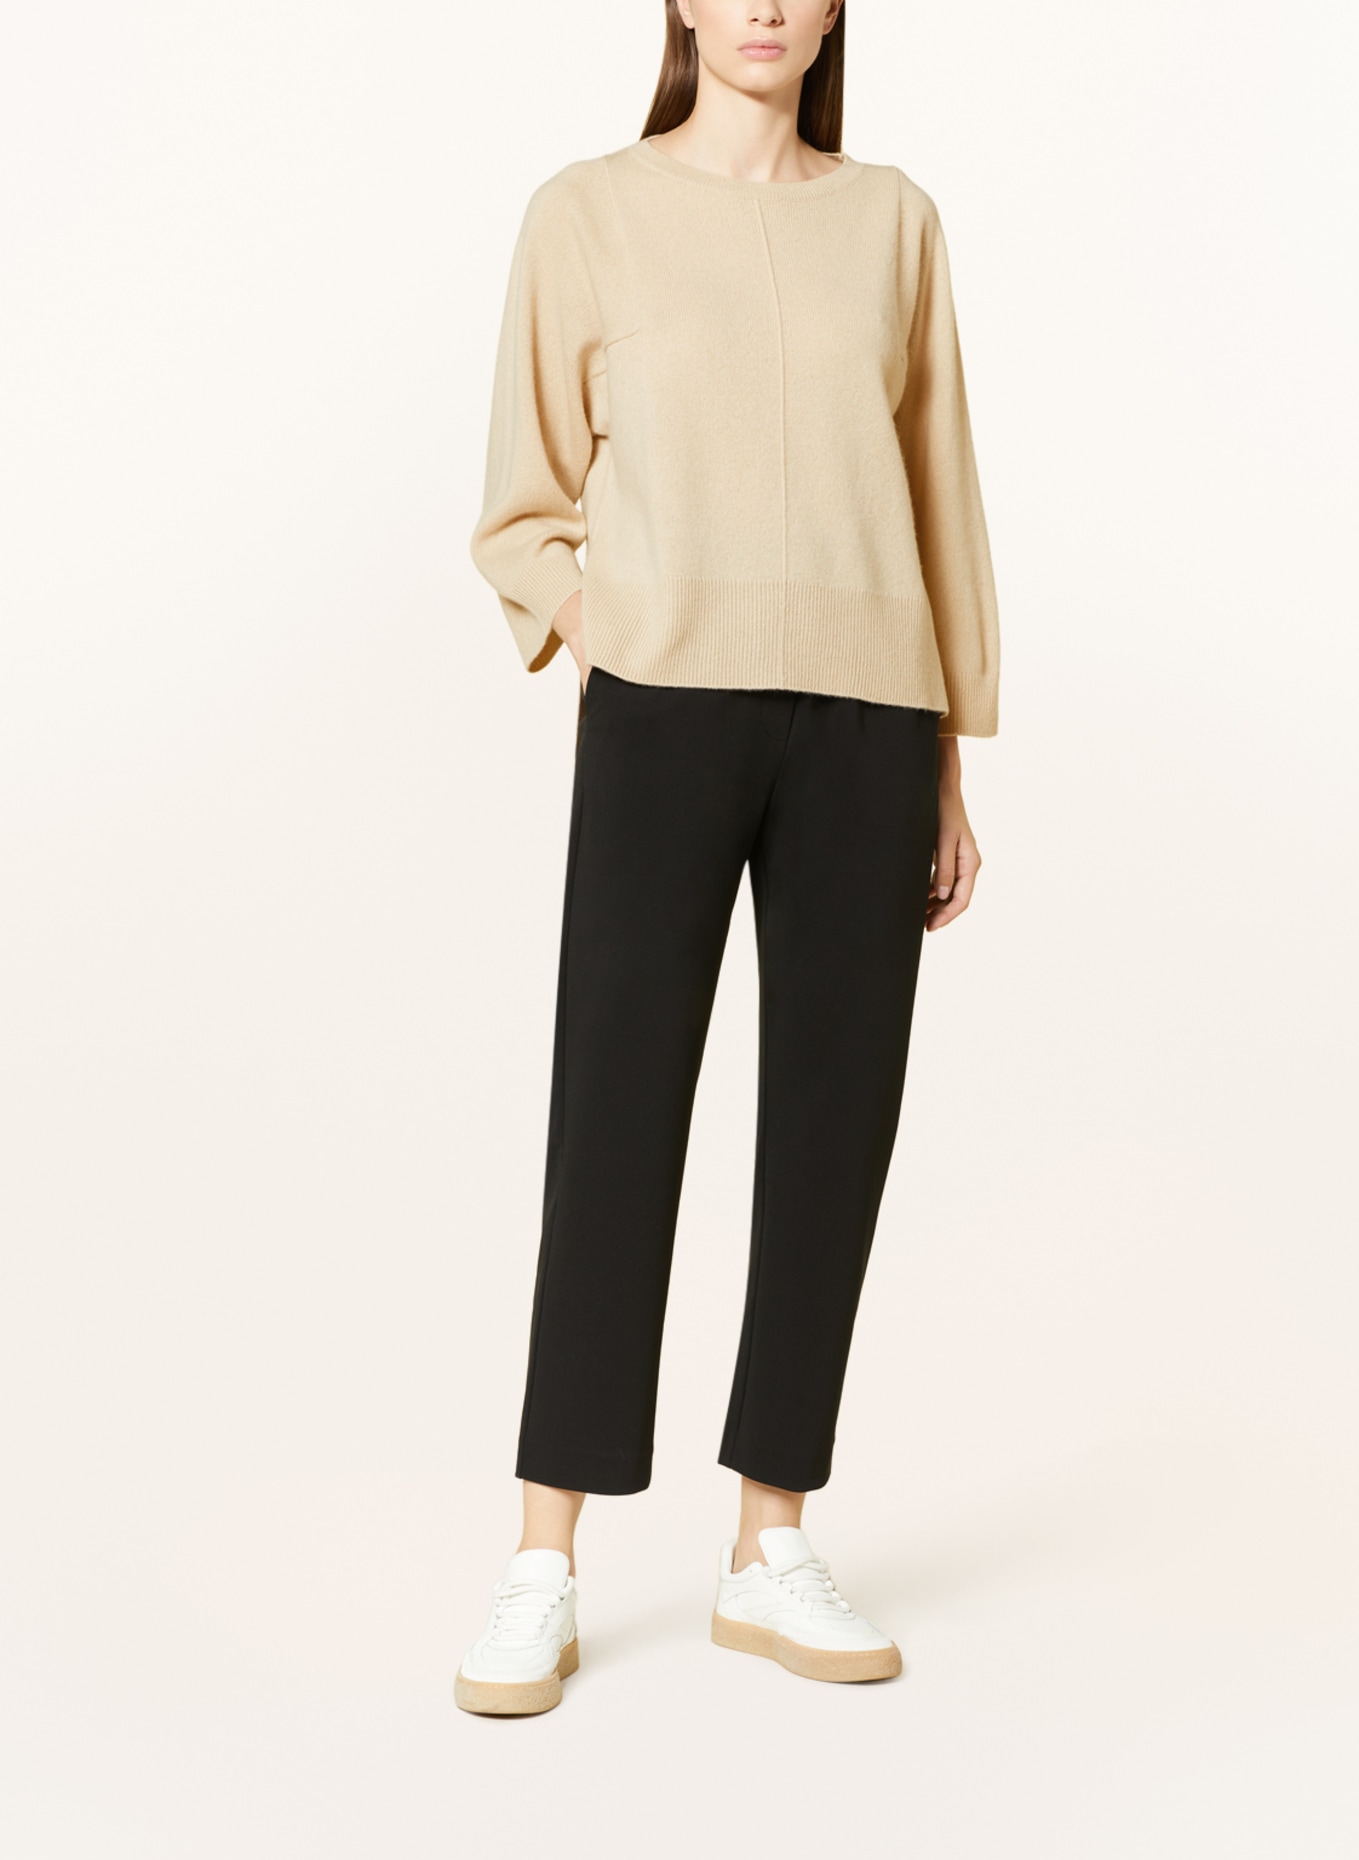 WEEKEND MaxMara Cashmere sweater ALCE with 3/4 sleeves, Color: BEIGE (Image 2)